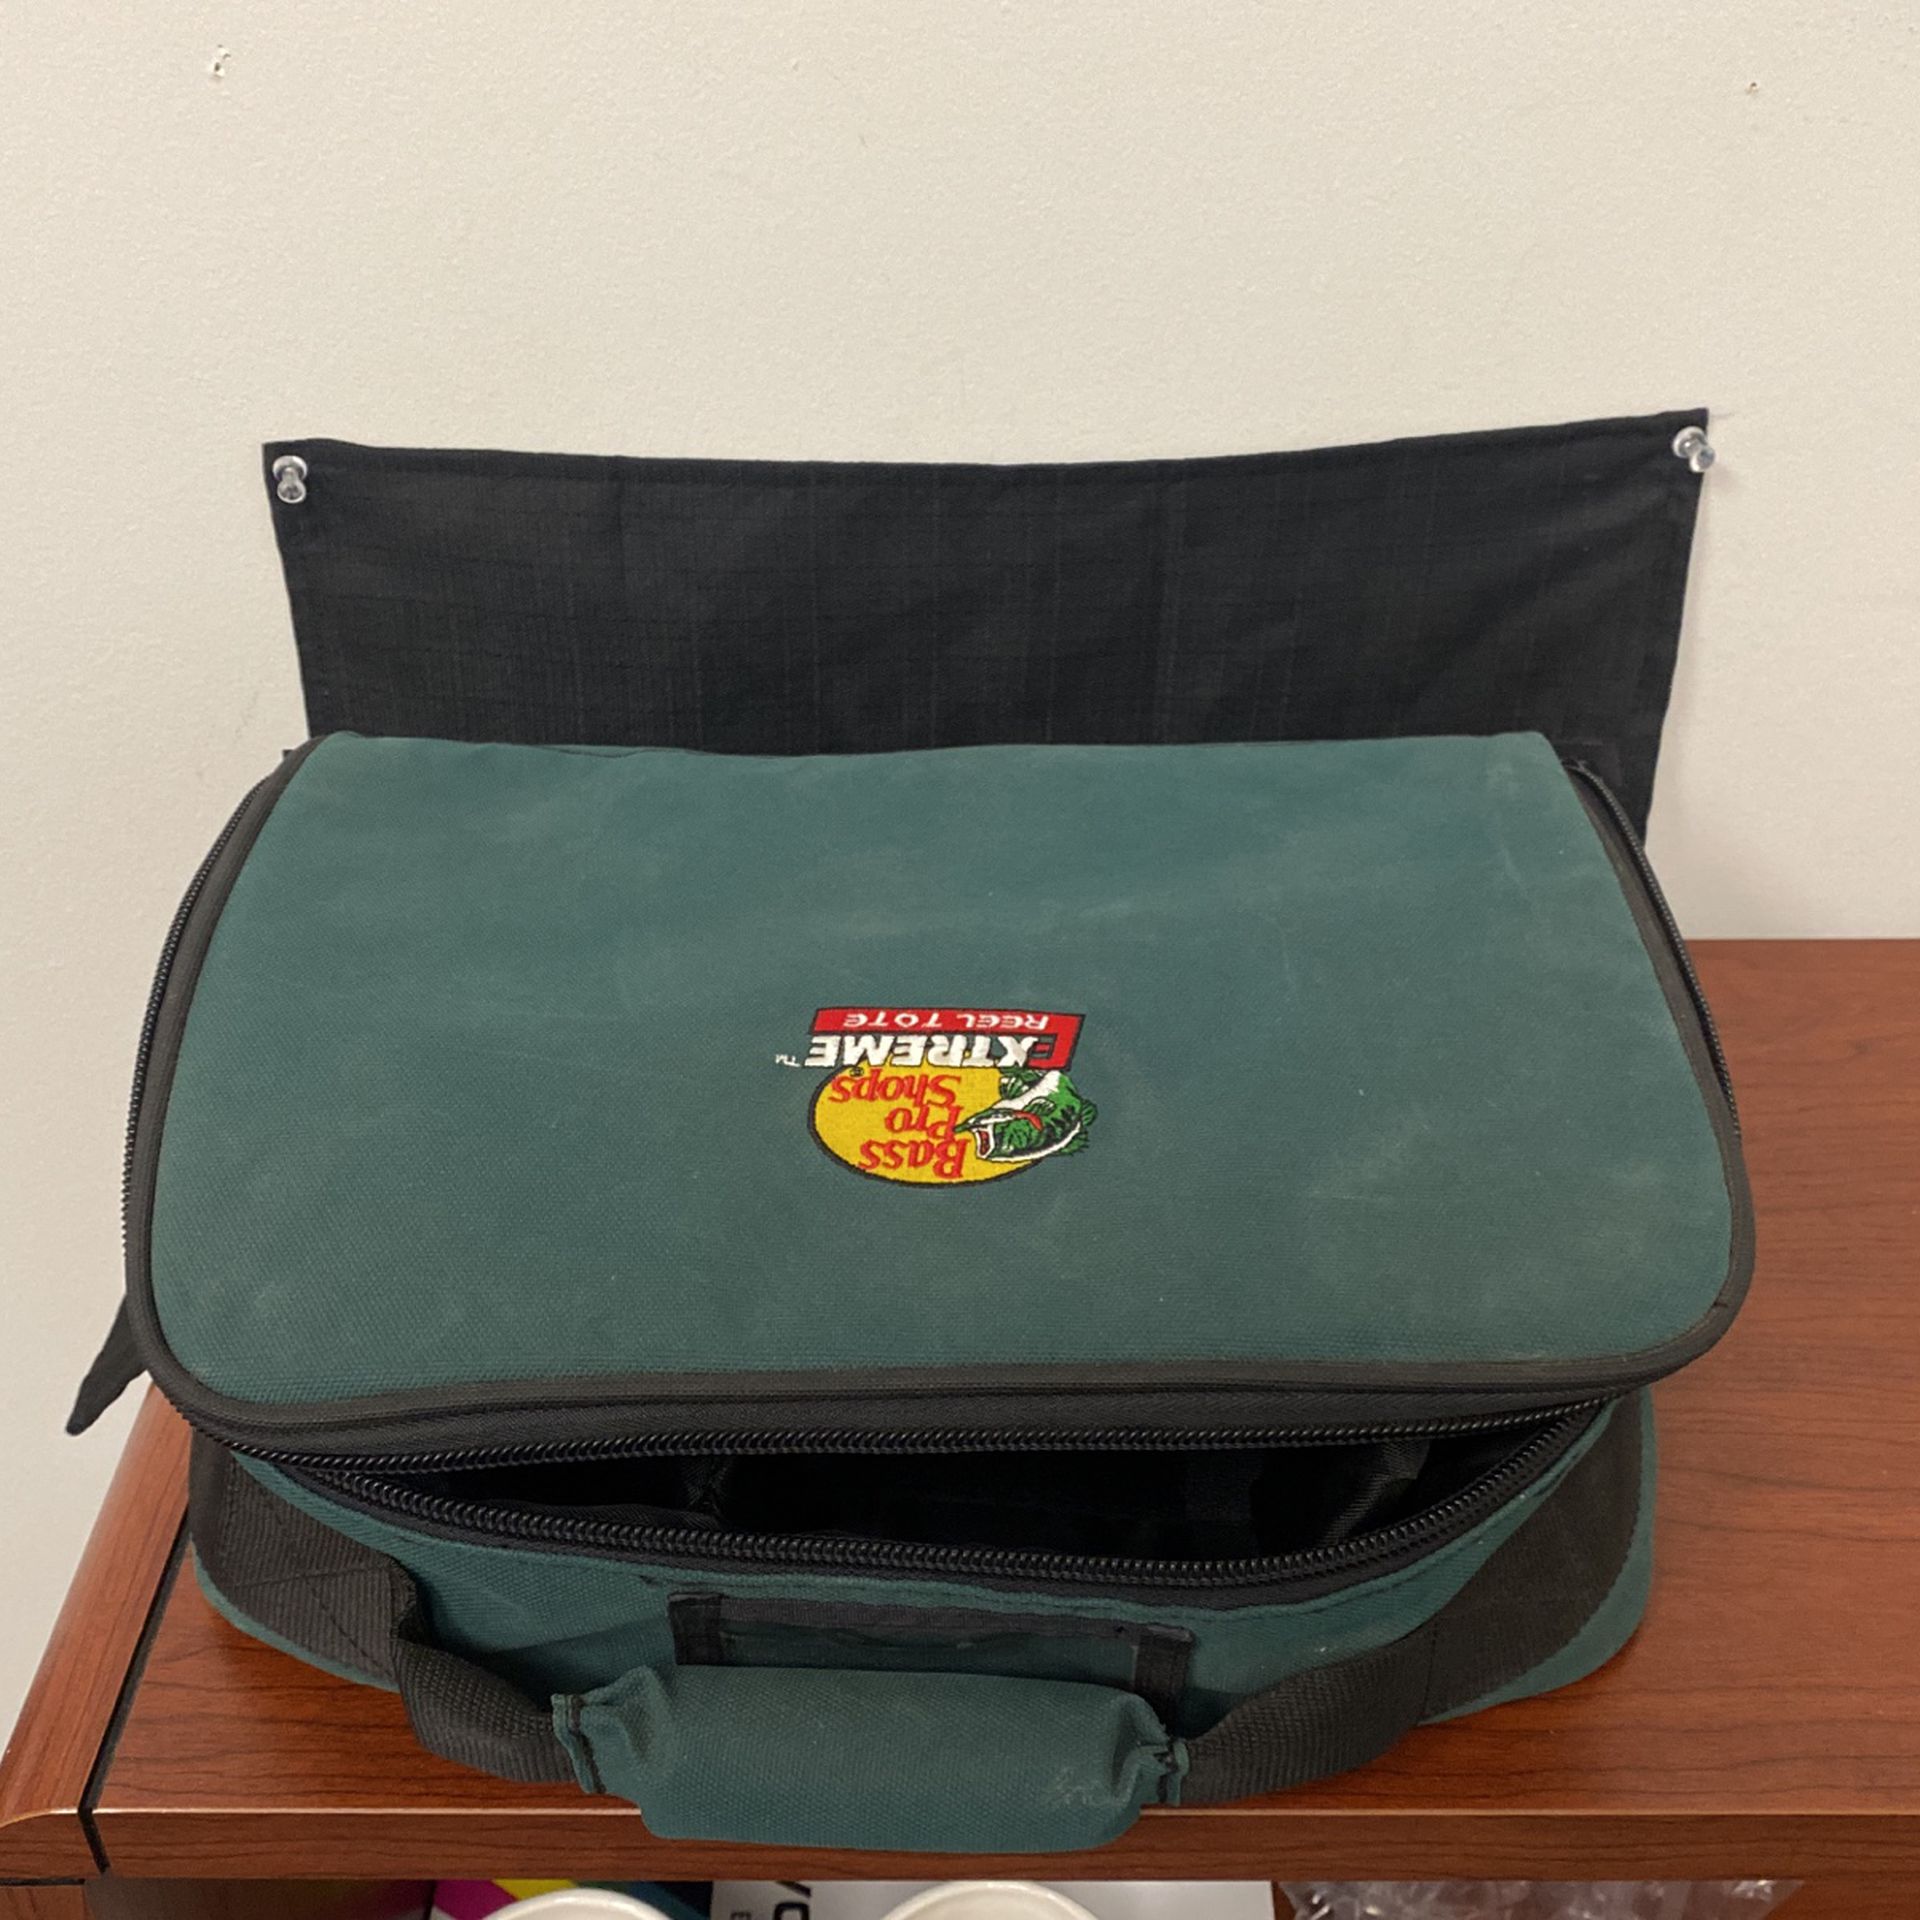 Bass Pro Shop Reel Tote $20 for Sale in West Covina, CA - OfferUp